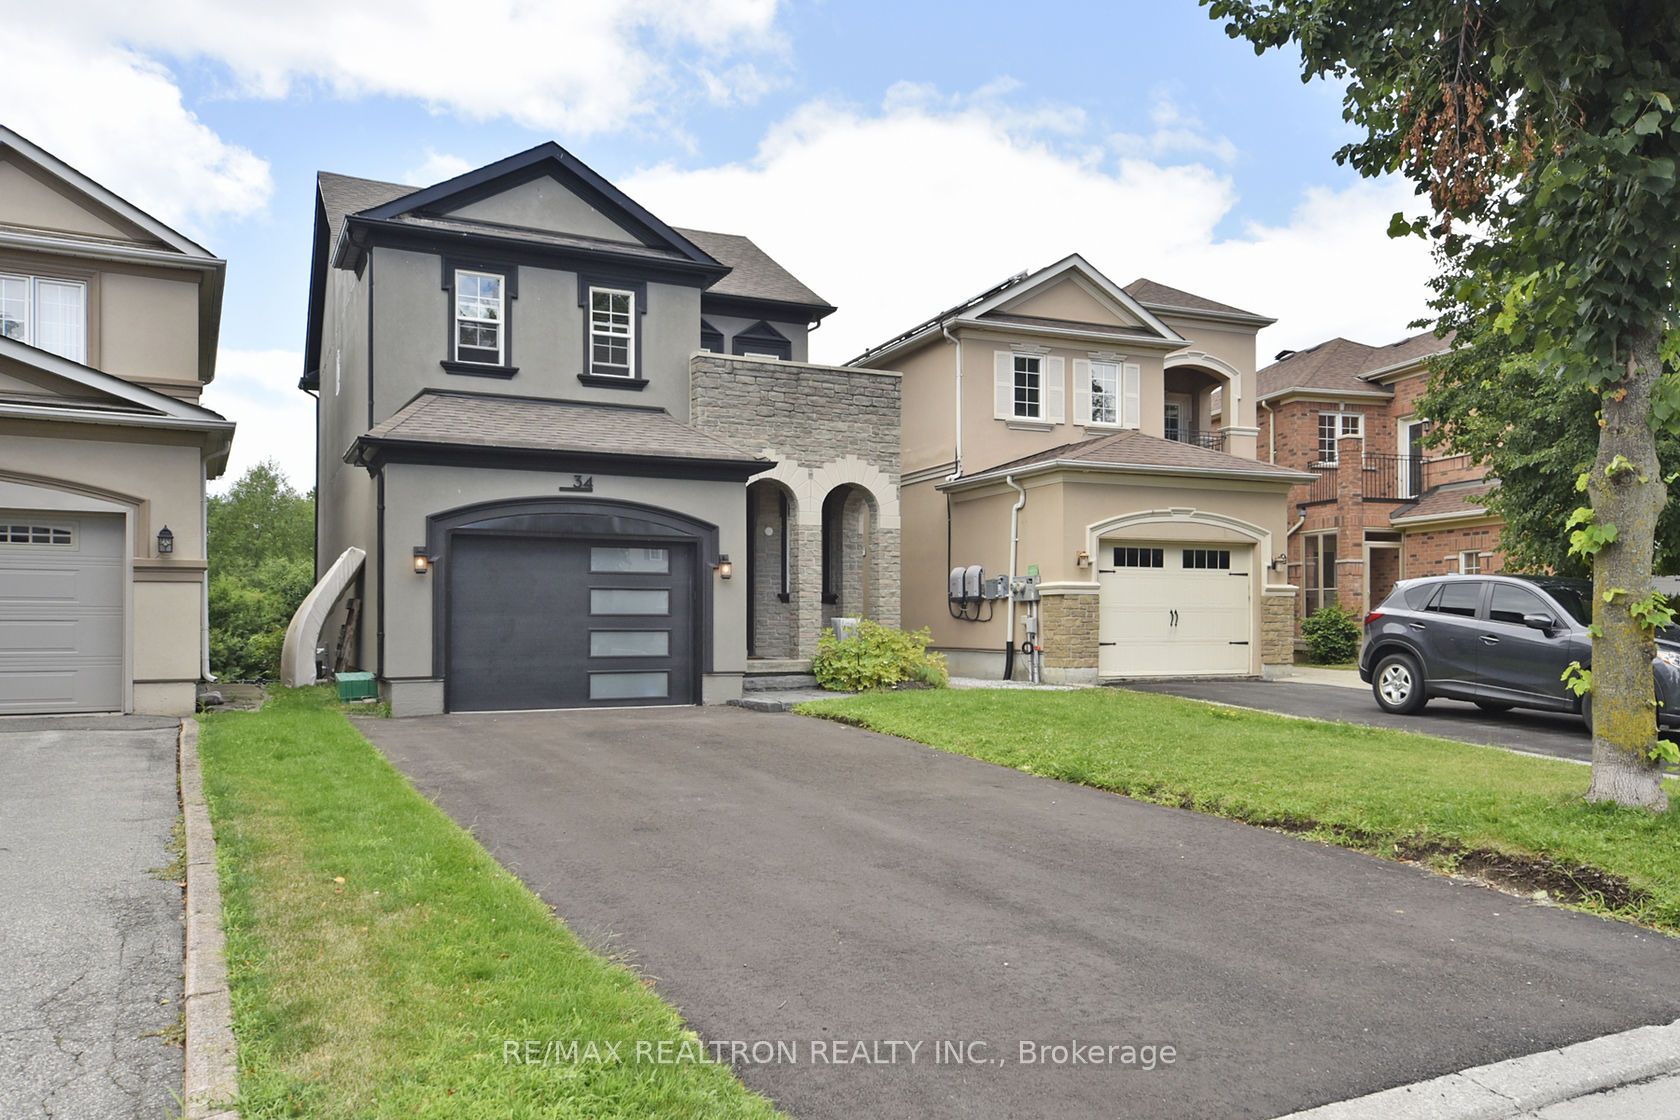 Detached house for sale at 34 Willow Tree St Vaughan Ontario